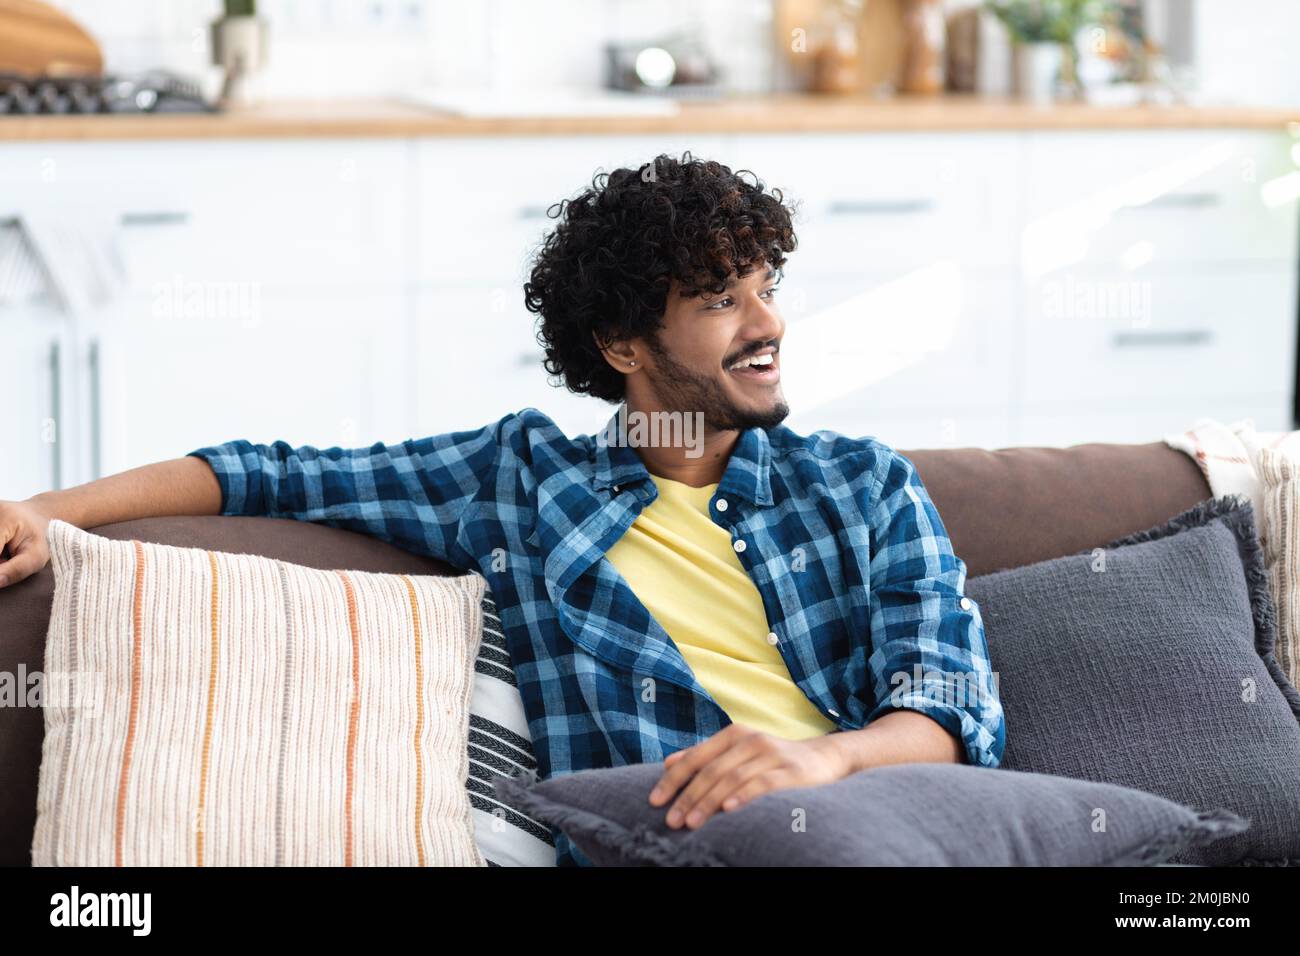 man relaxing, dreaming about something sitting at home on a comfortable sofa. Man enjoying lazy leisure time Stock Photo